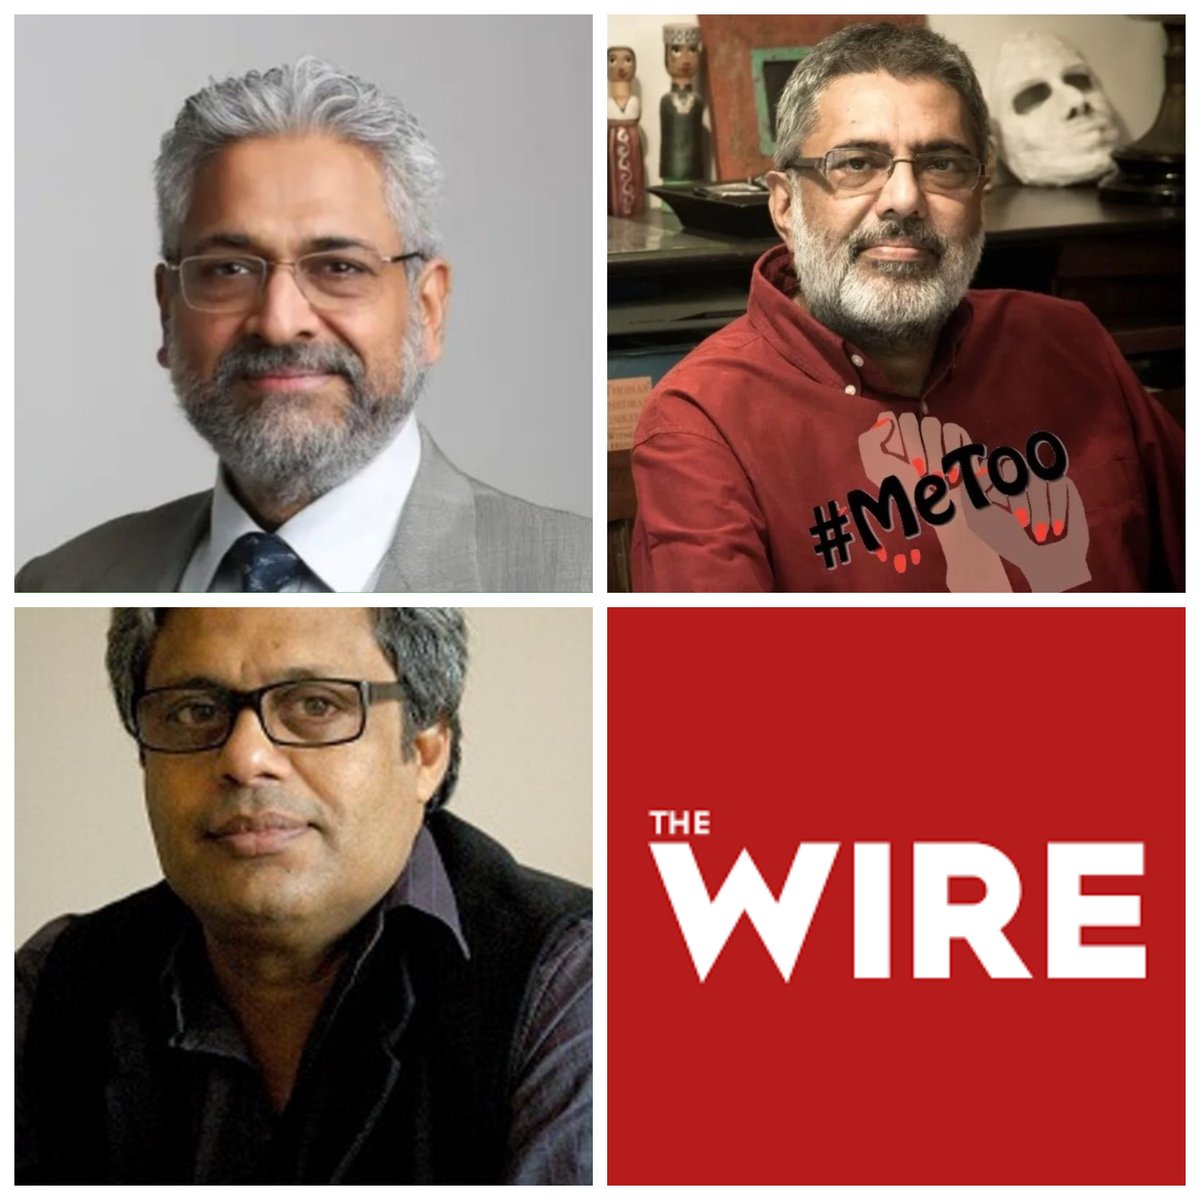 'The Wire' – A controversial website that promotes Far-left politics of Communism, and Marxism in India,  has been accused of publishing fake news at times.

It was founded in 2015 by American citizen Siddharth Varadarajan, #MeToo  accused Sidharth Bhatia and M. K. Venu.